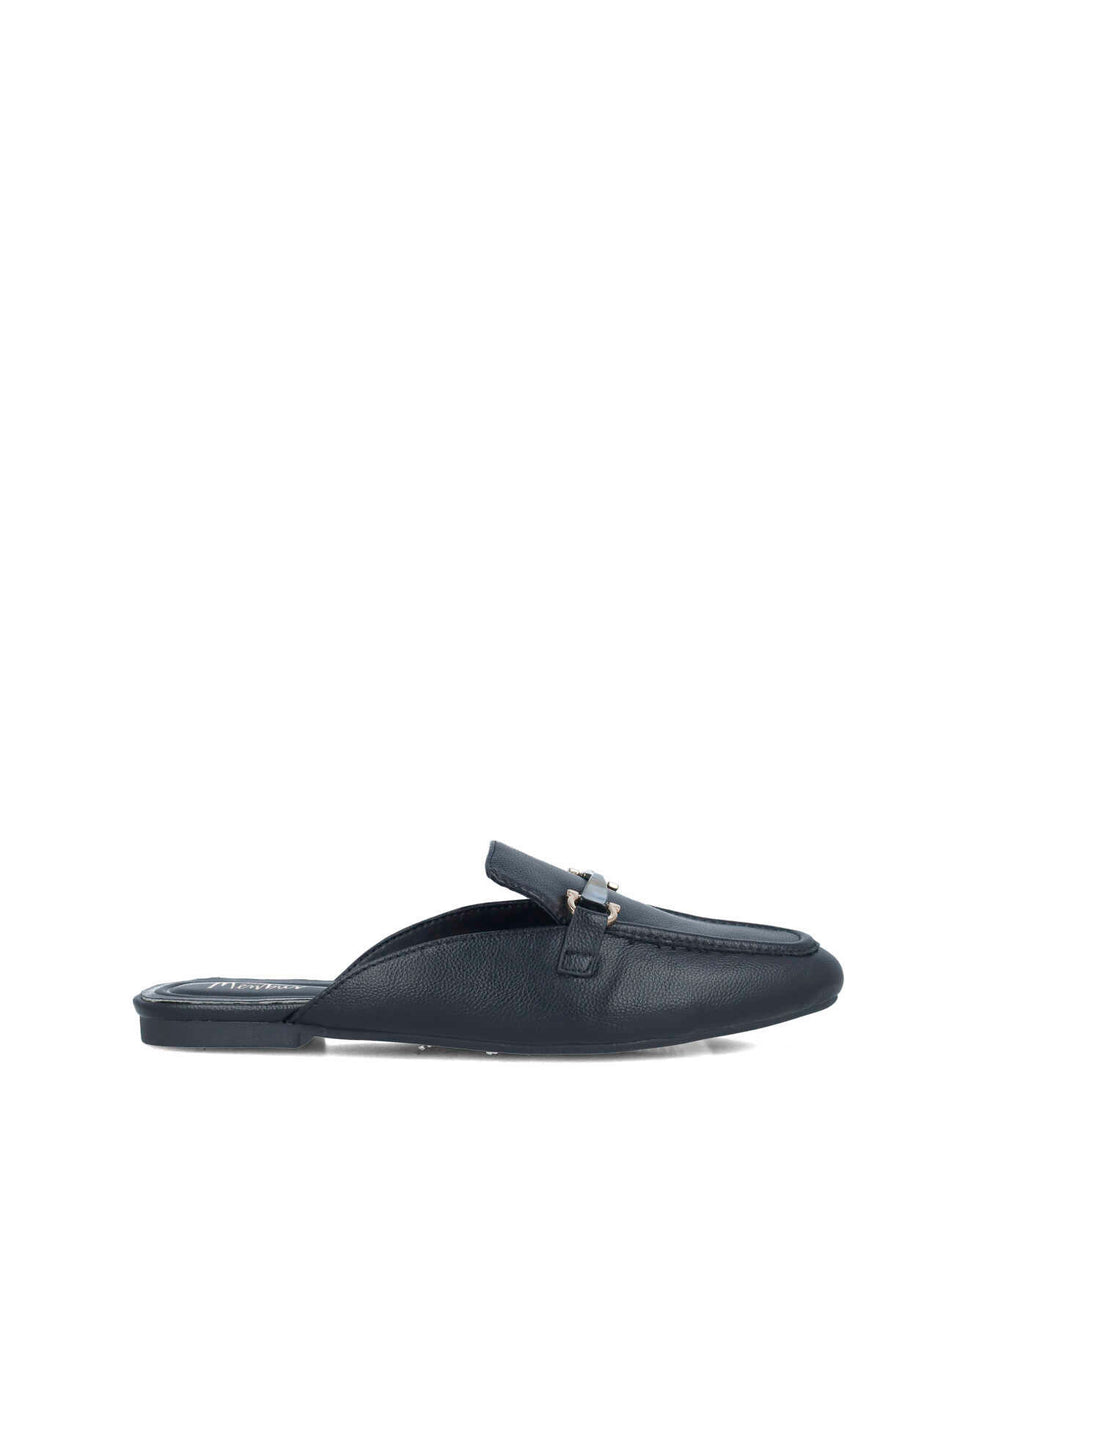 Black Slipper Mules With Silver Hardware_25560_01_01